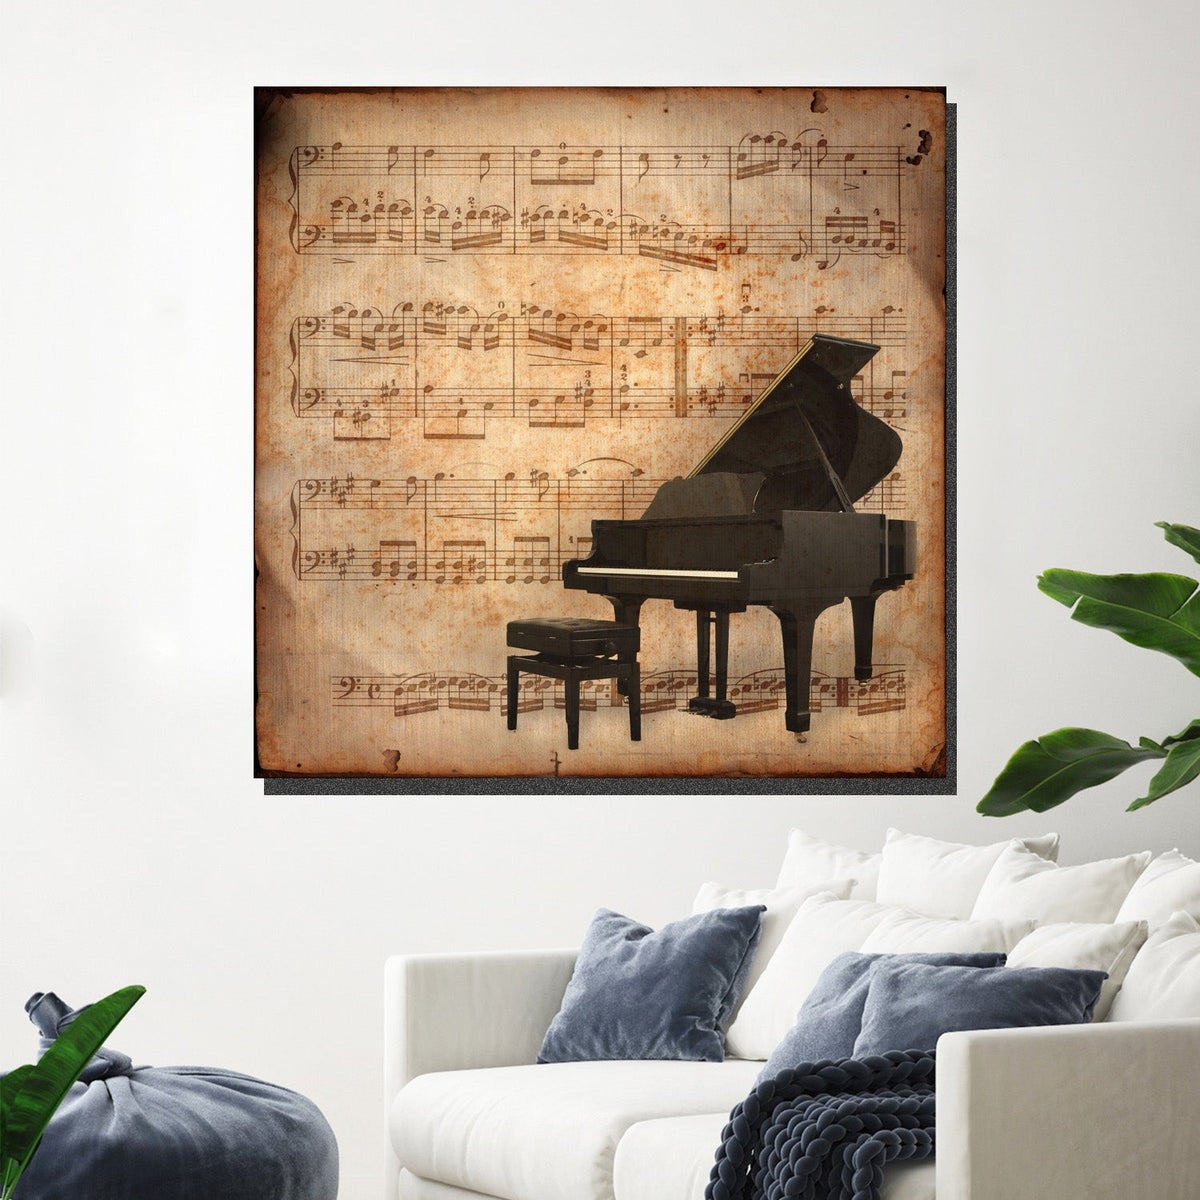 https://cdn.shopify.com/s/files/1/0387/9986/8044/products/AntiquePianoCanvasArtprintStretched-1.jpg